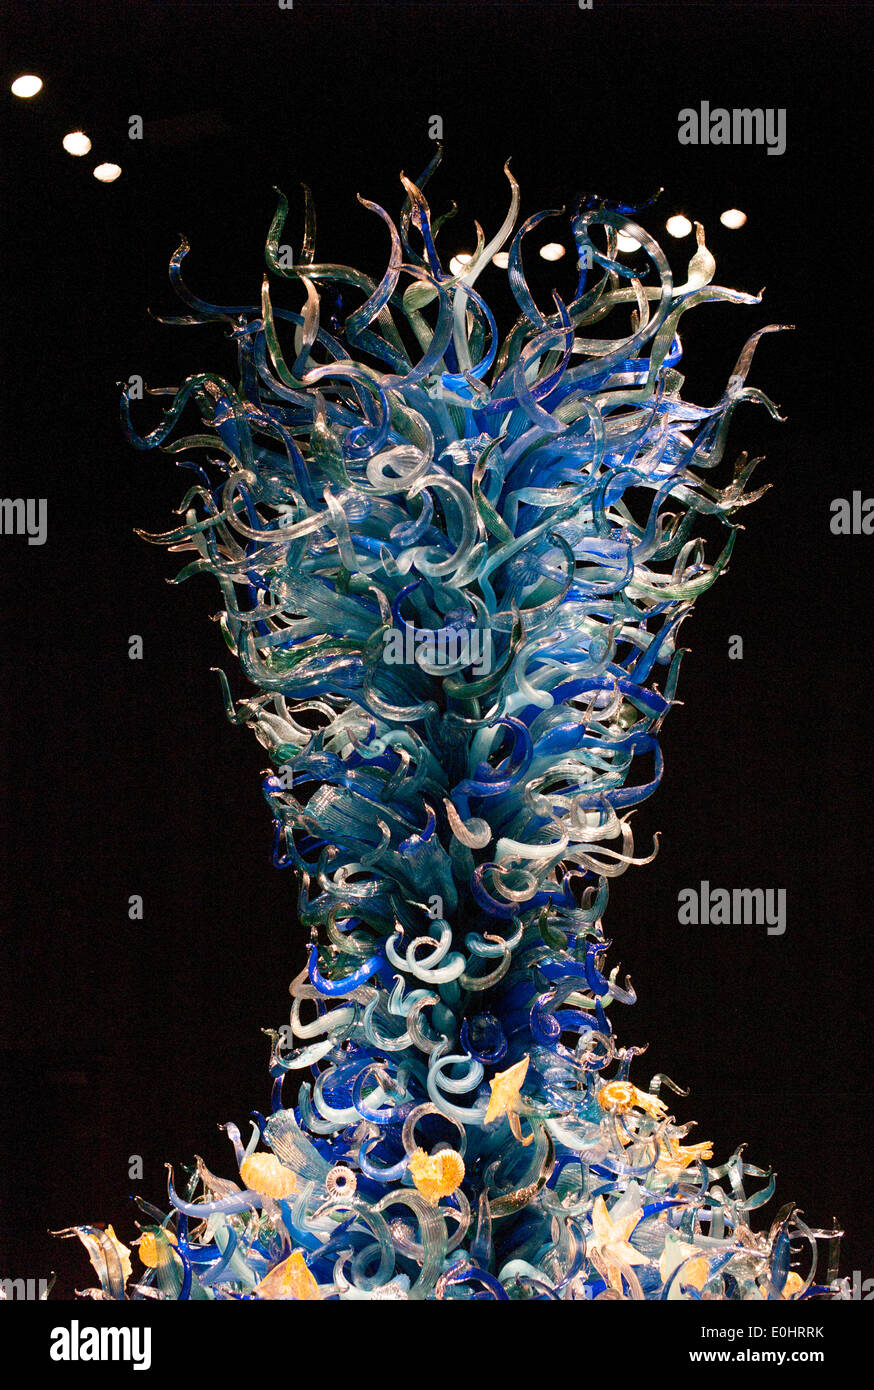 Glass sculpture at the Chihuly Garden and Glass Museum, Seattle Center, Seattle, Washington State, USA Stock Photo